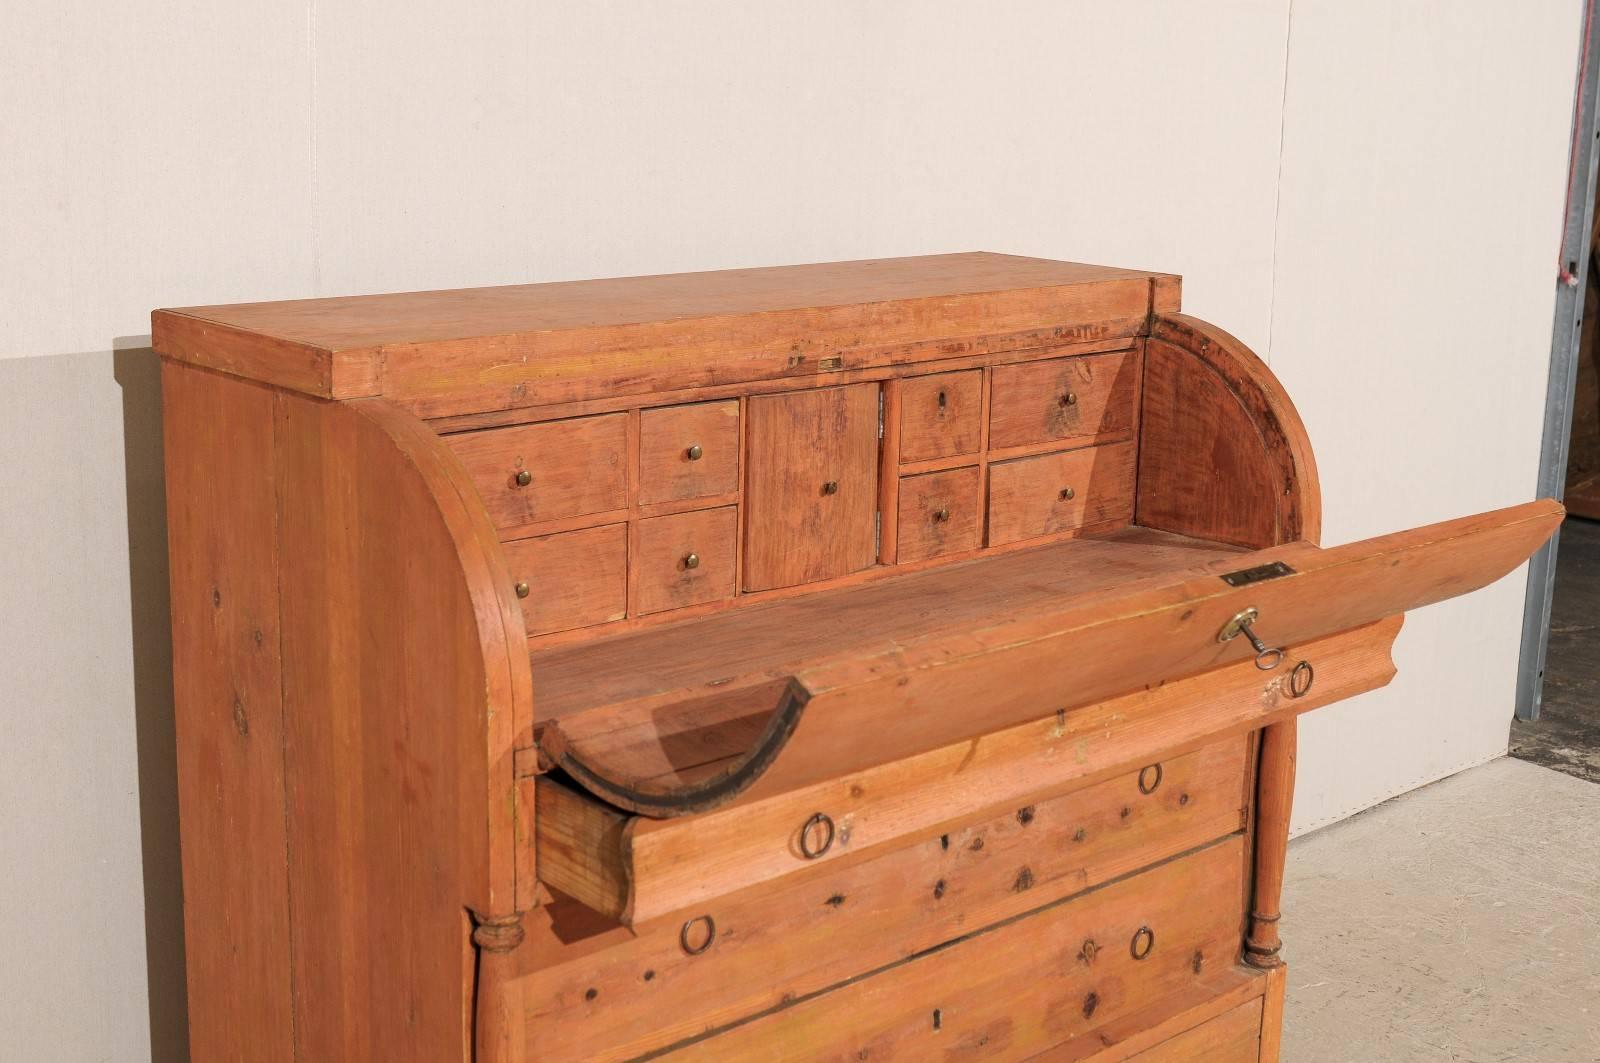 Swedish Mid-19th Century Chest with Convex Drop Front and Inner Drawers For Sale 2